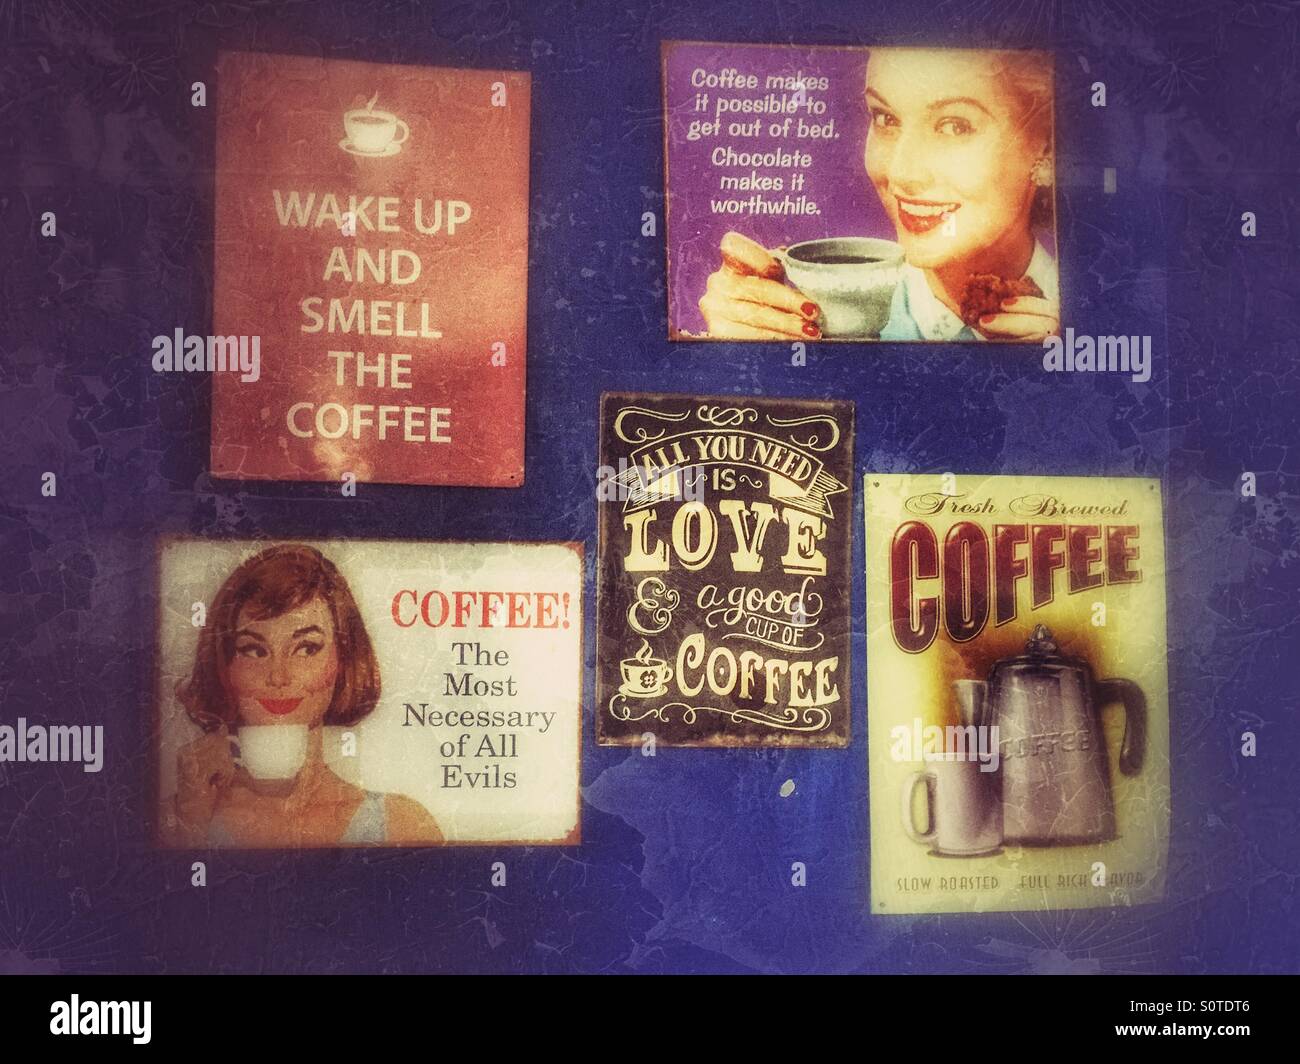 A group of retro effect signs used to advertise COFFEE! All you need is Coffee. Wake Up and Smell The Coffee. Photo Credit - © COLIN HOSKINS. Stock Photo